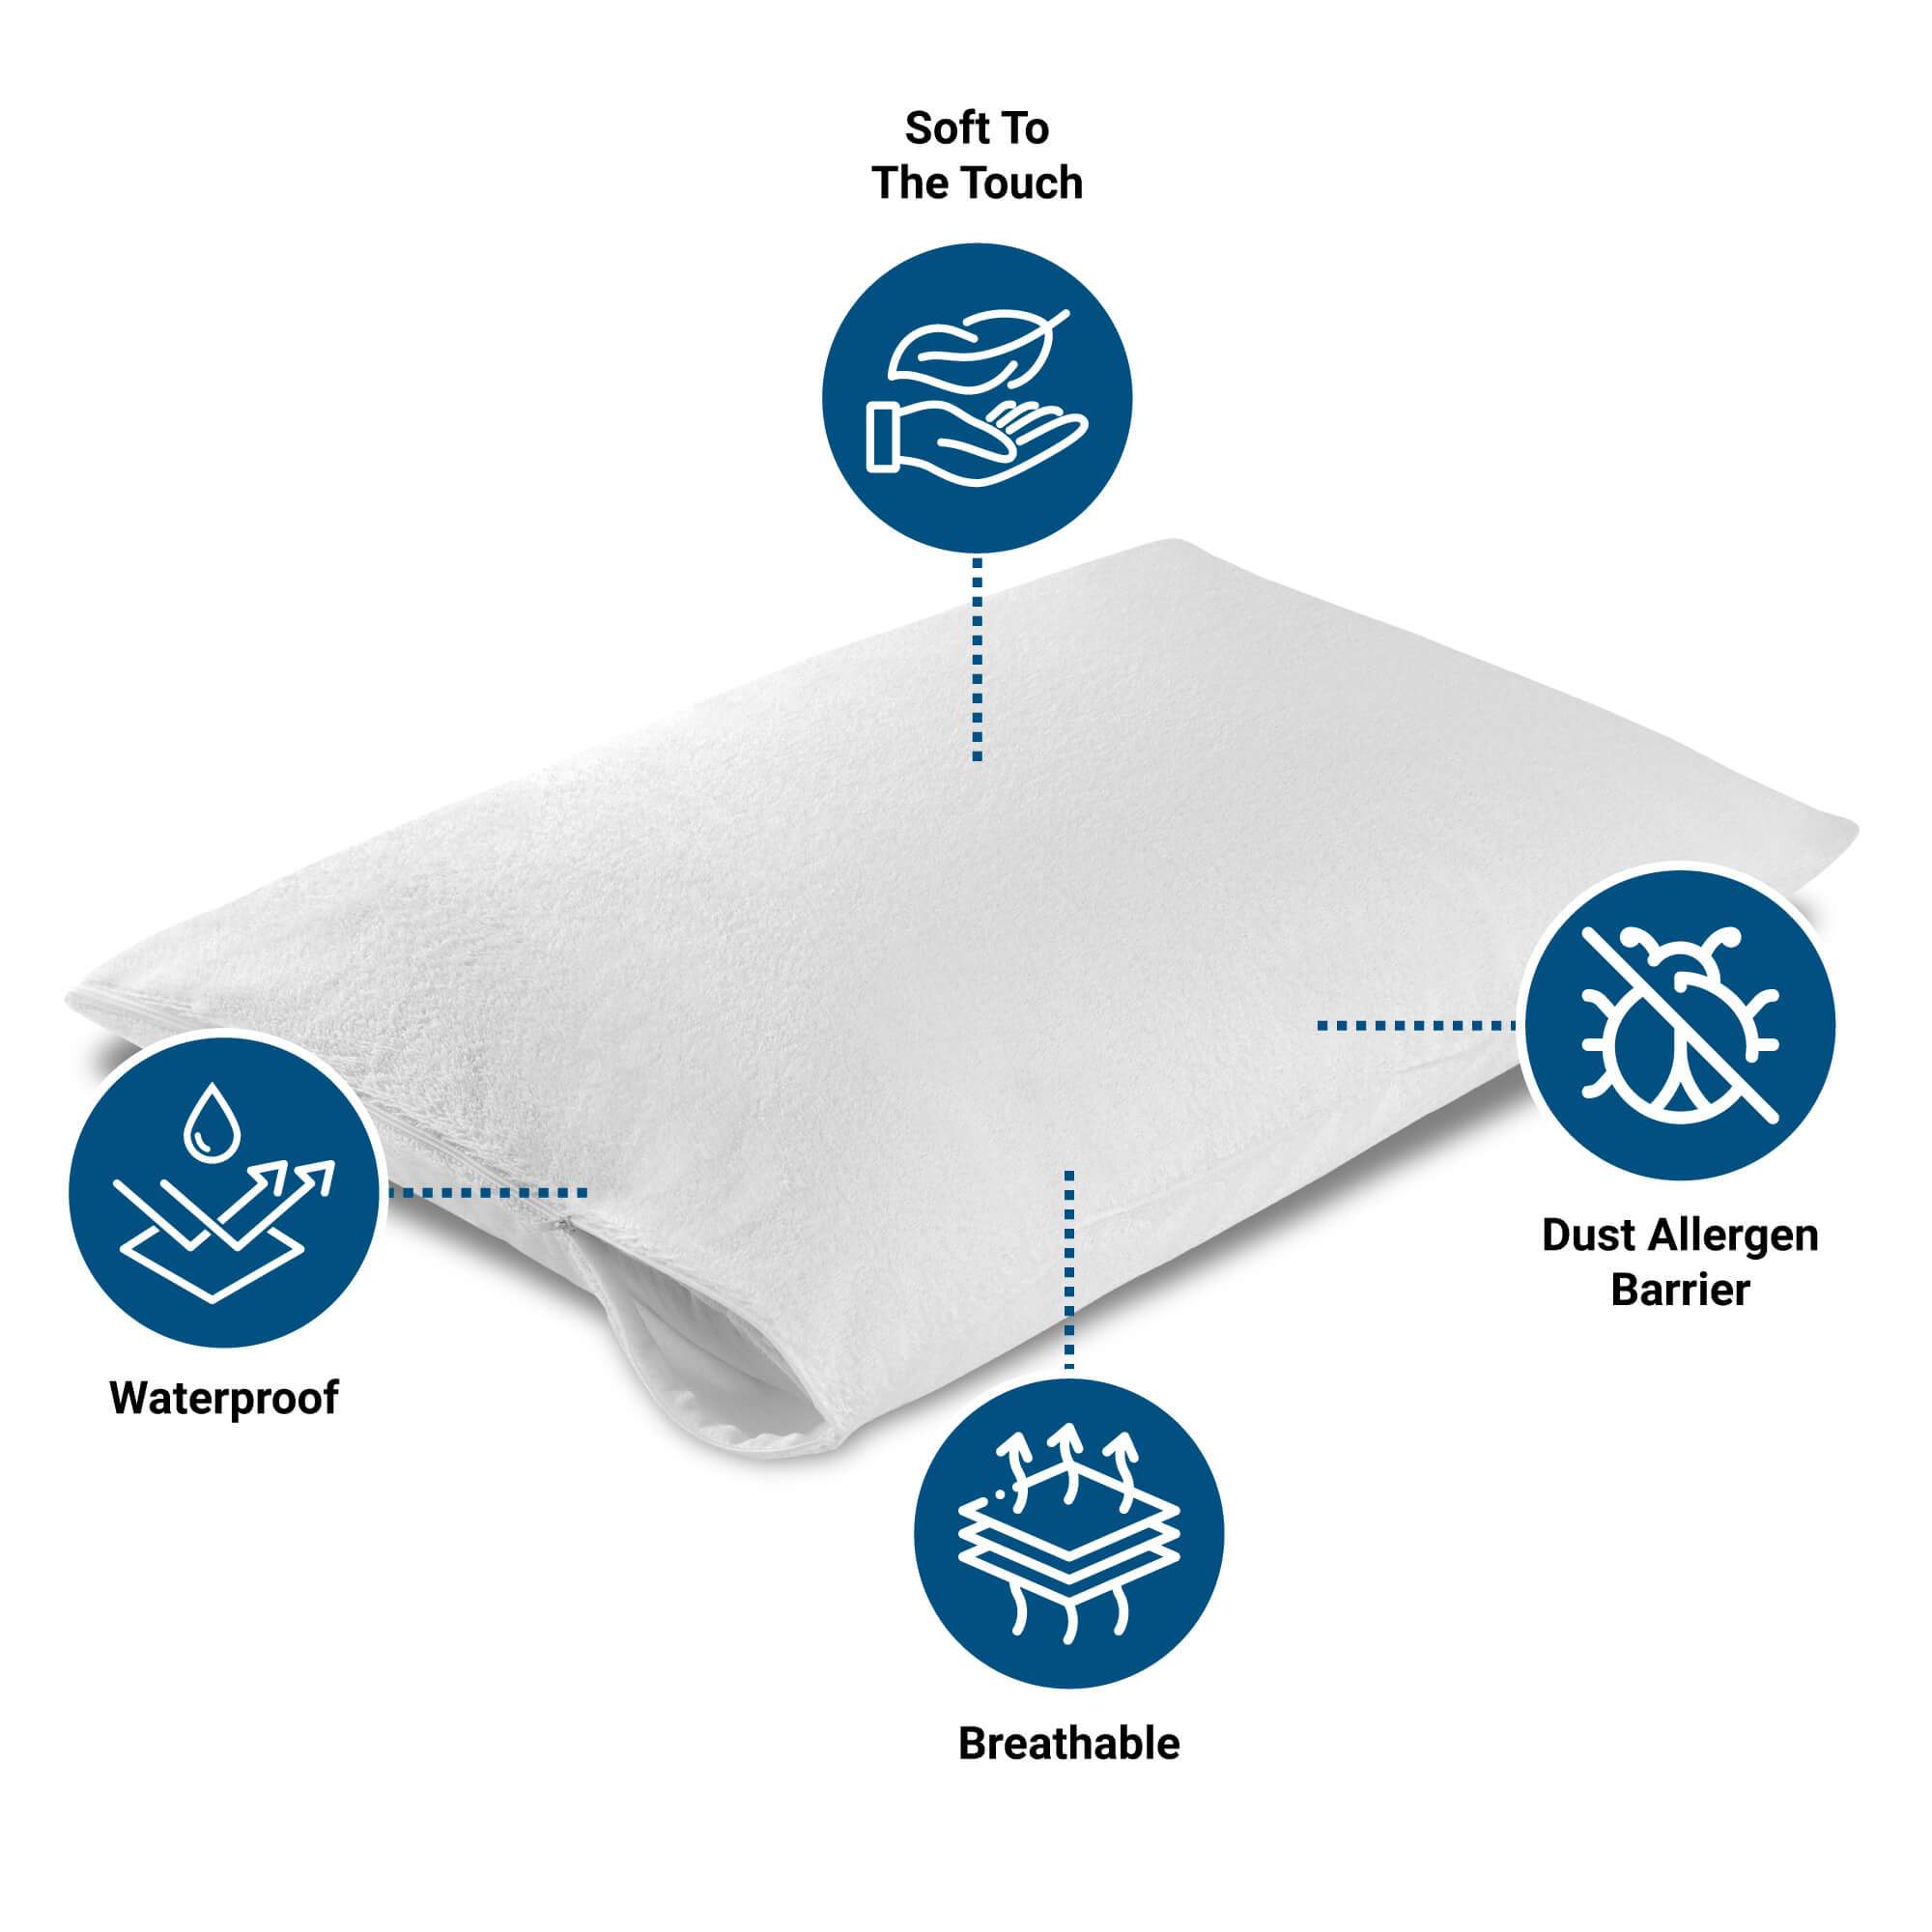 Terry Waterproof Pillow Covers - Enhanced Protection Within your Budget Pillow Protector Bargoose Home Textiles, Inc. 